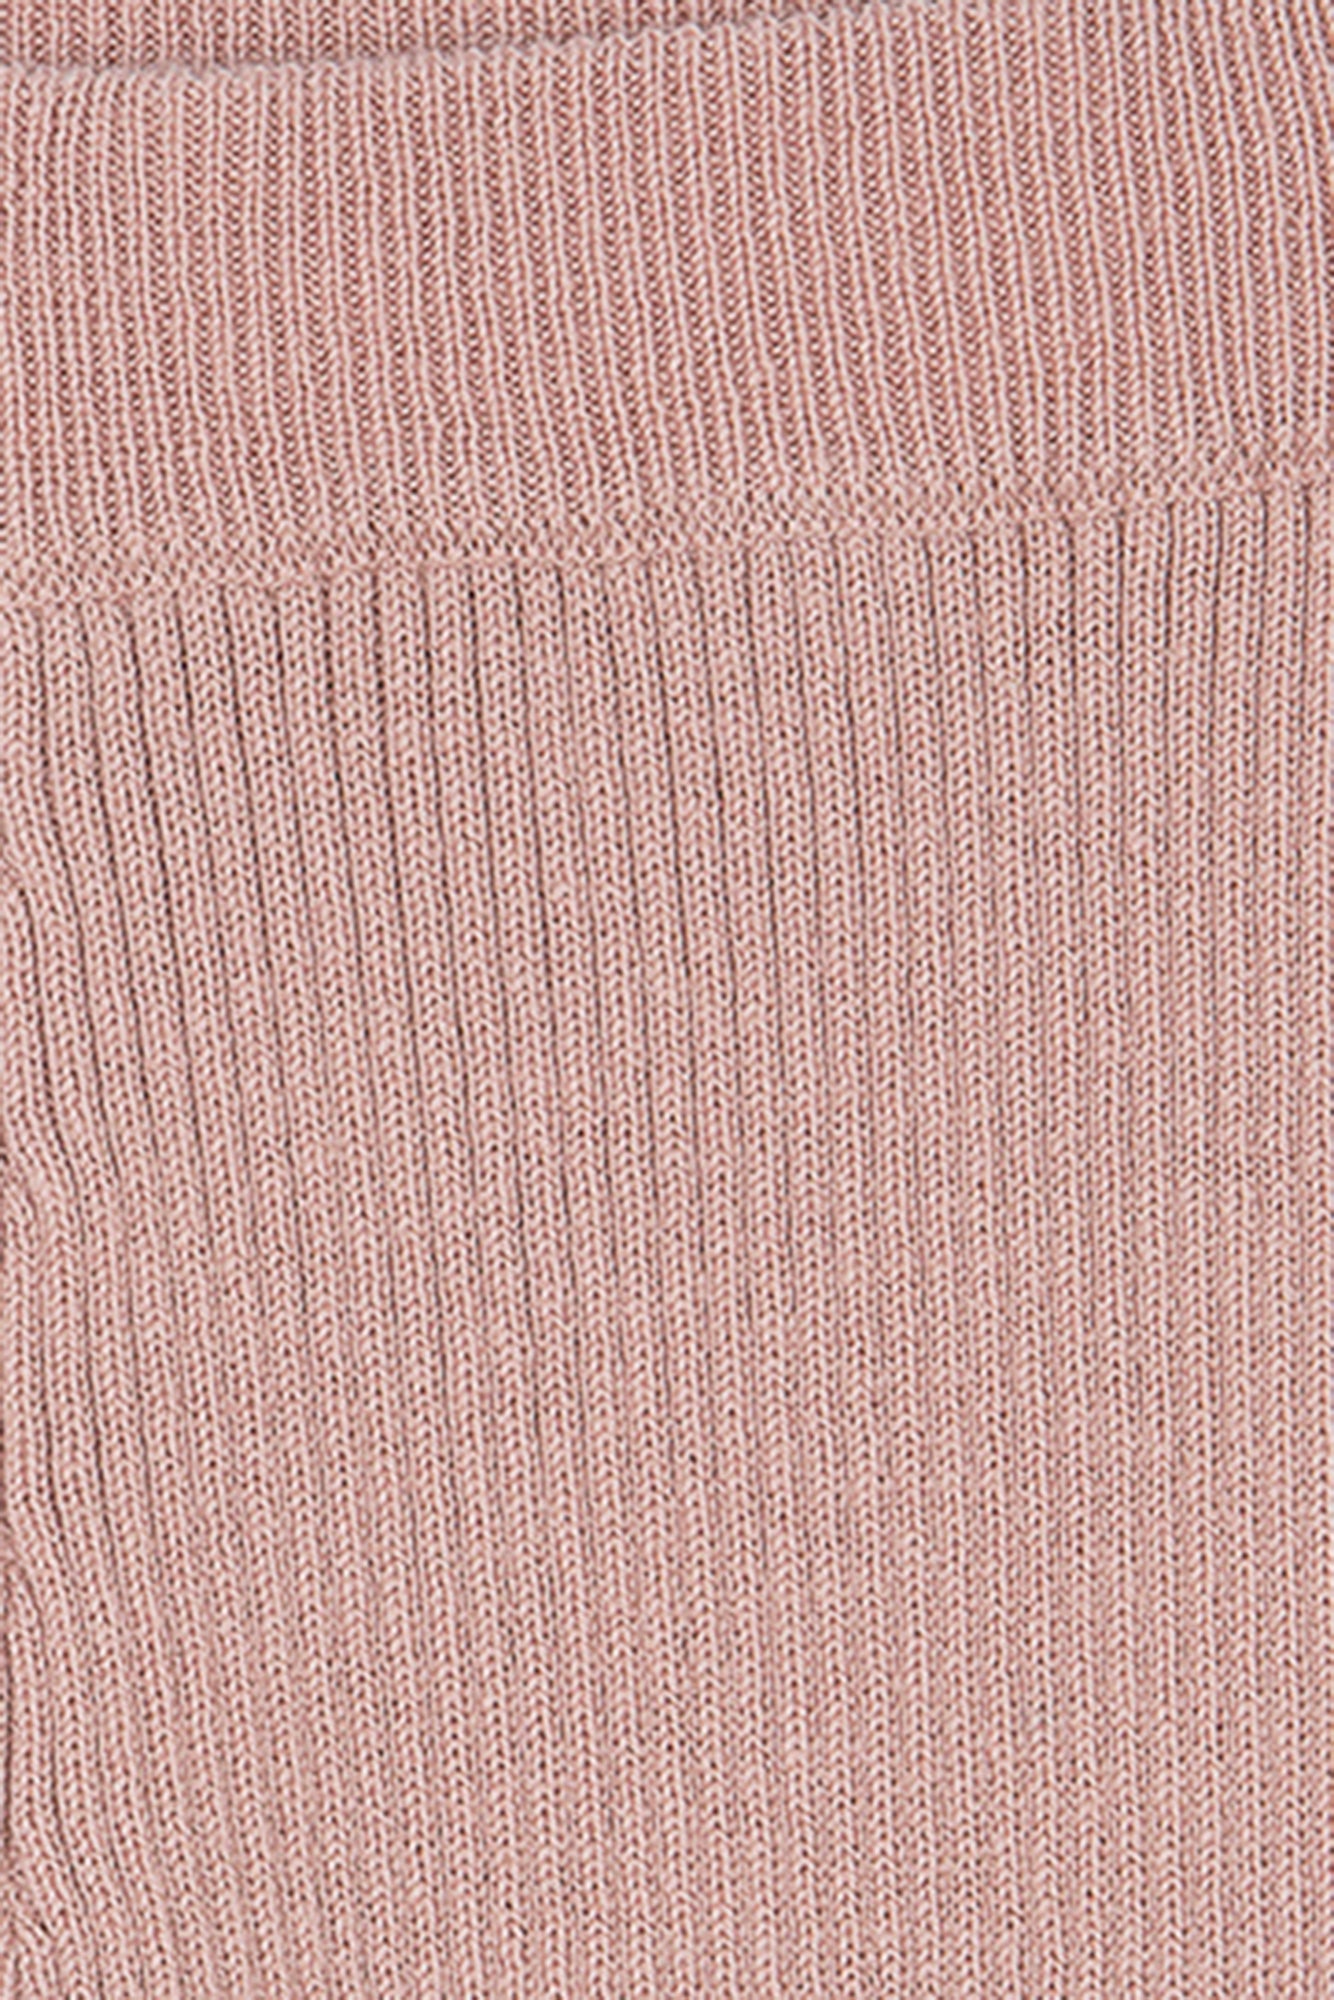 Legging - Pink Baby in a knit